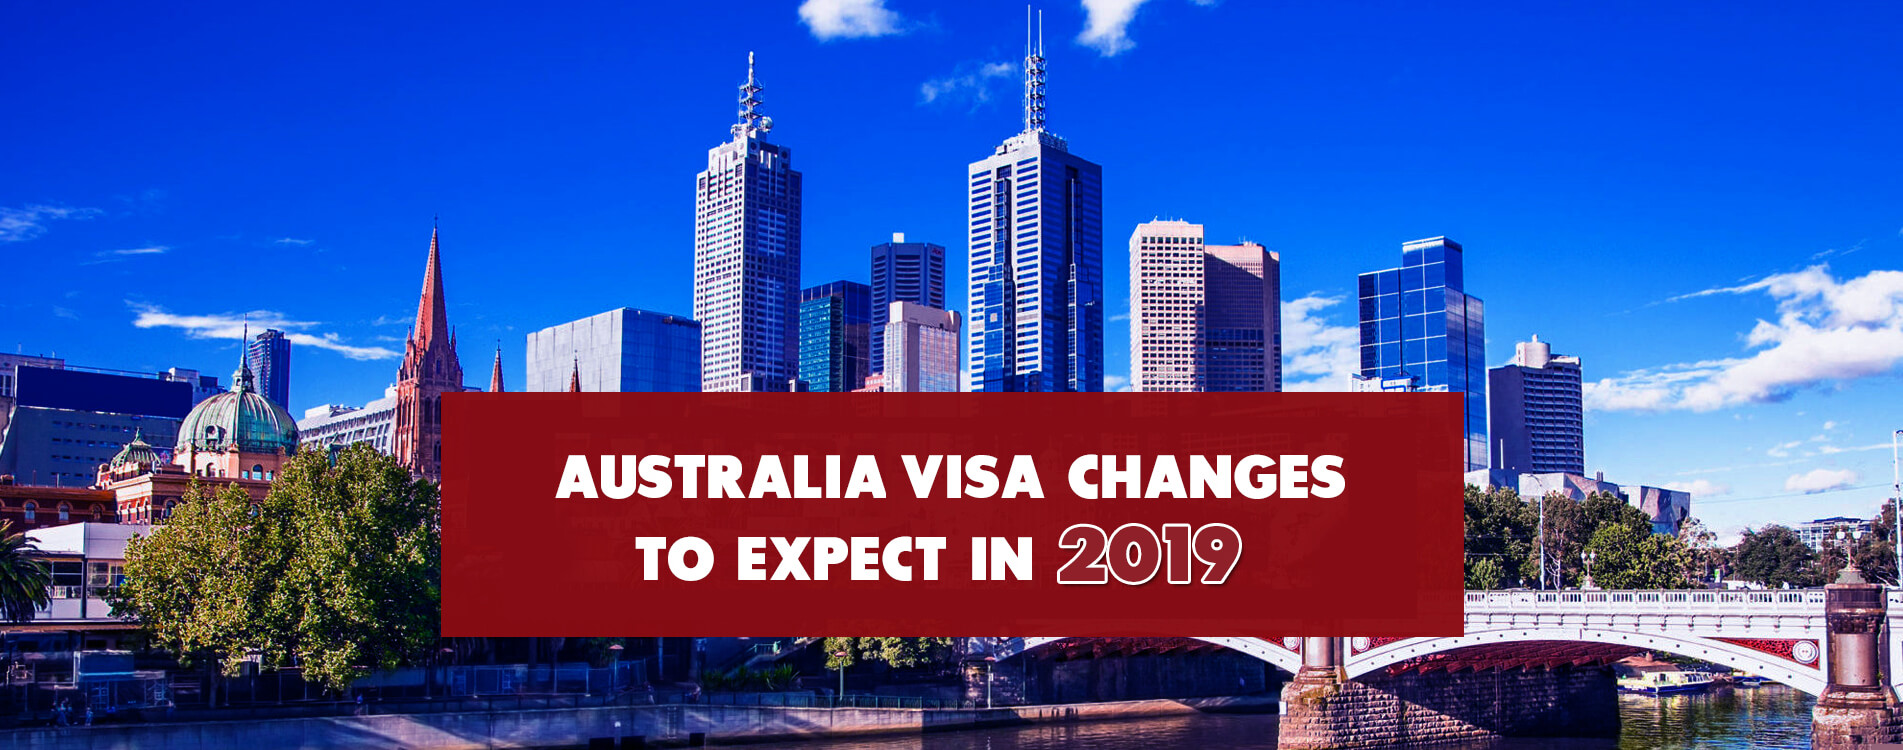 Australia Visa Changes to Expect in 2019